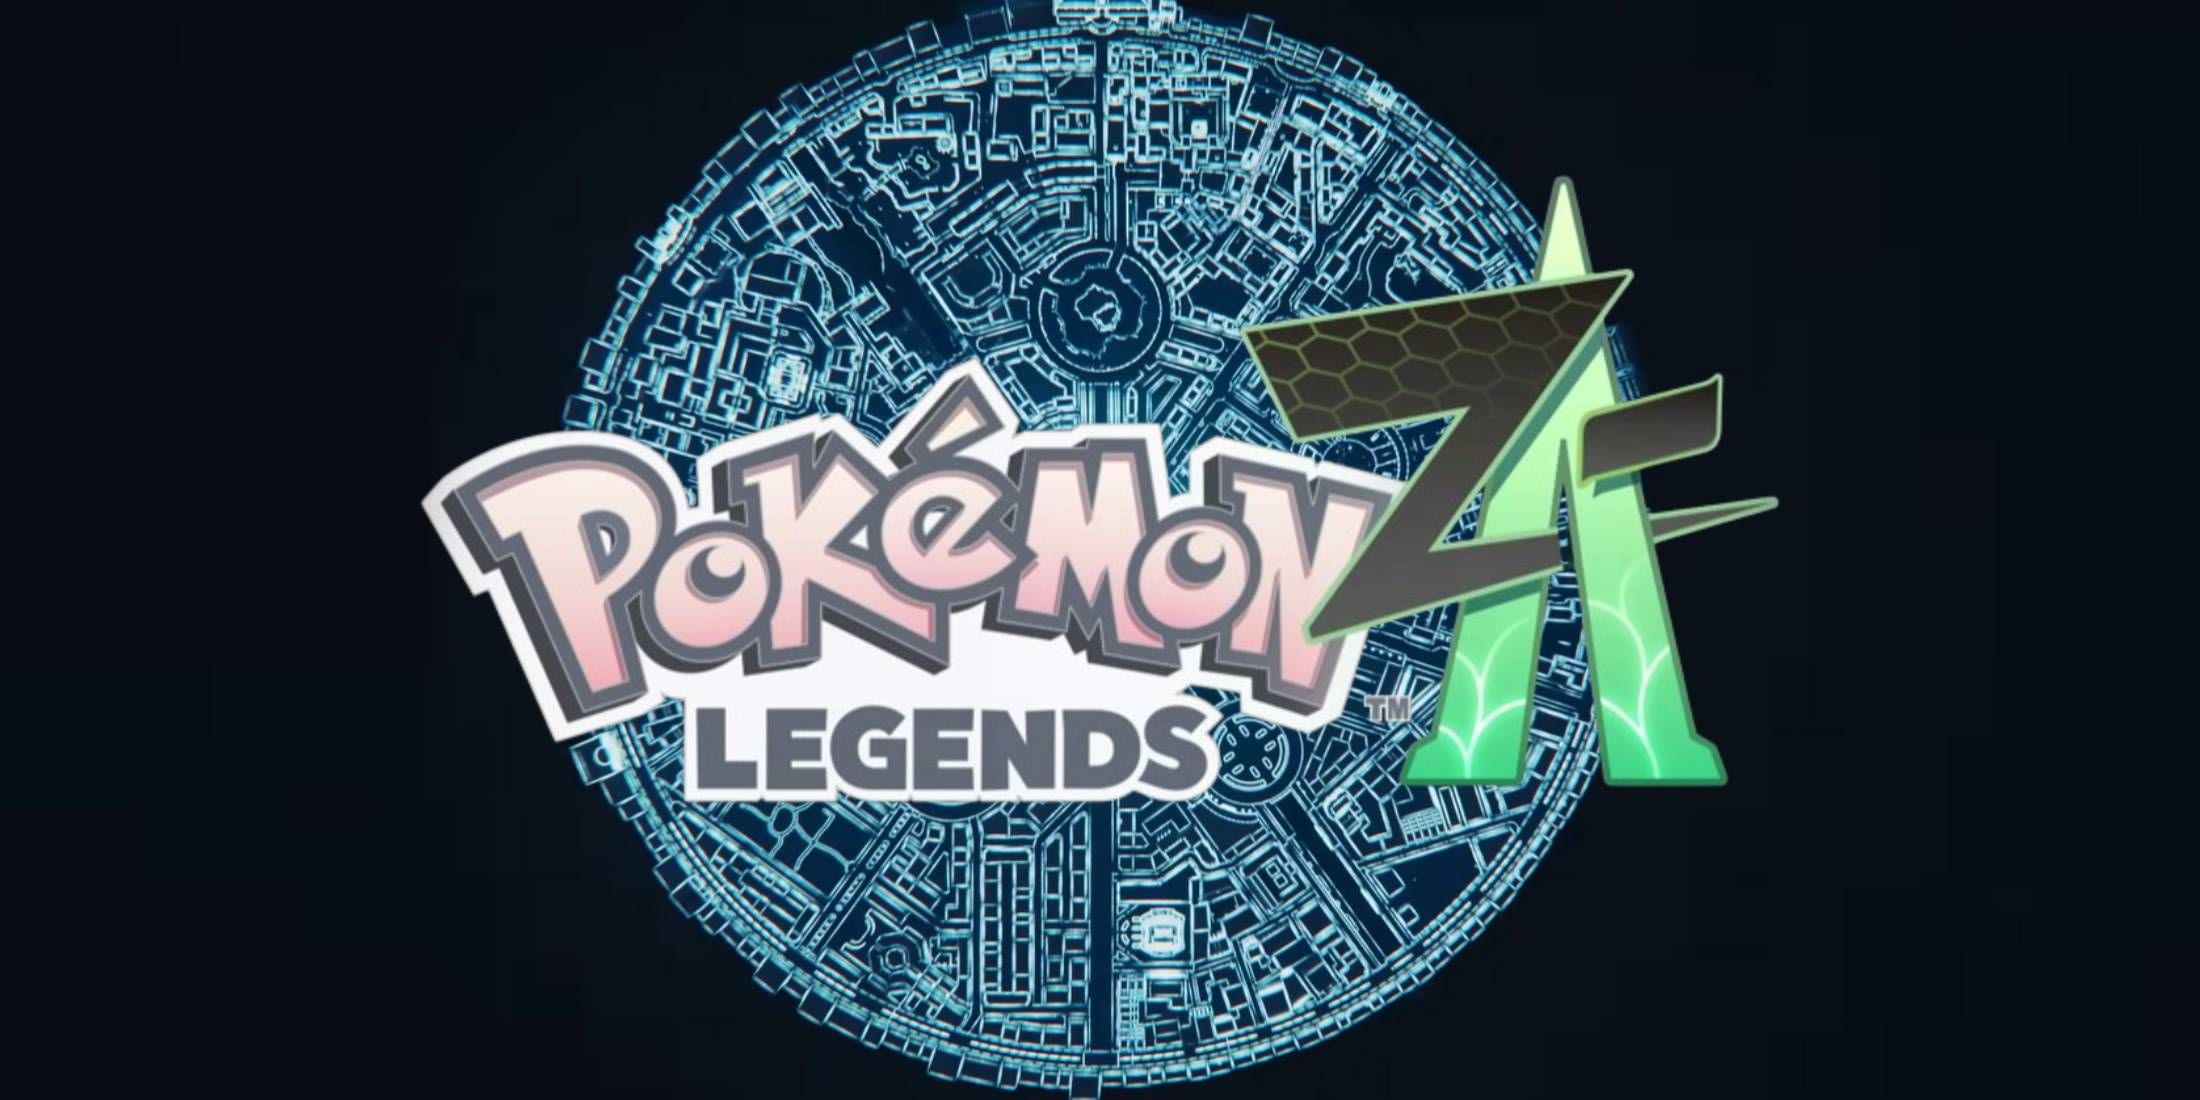 The logo for Pokemon Legends: Z-A over a holographic map of Lumiose City